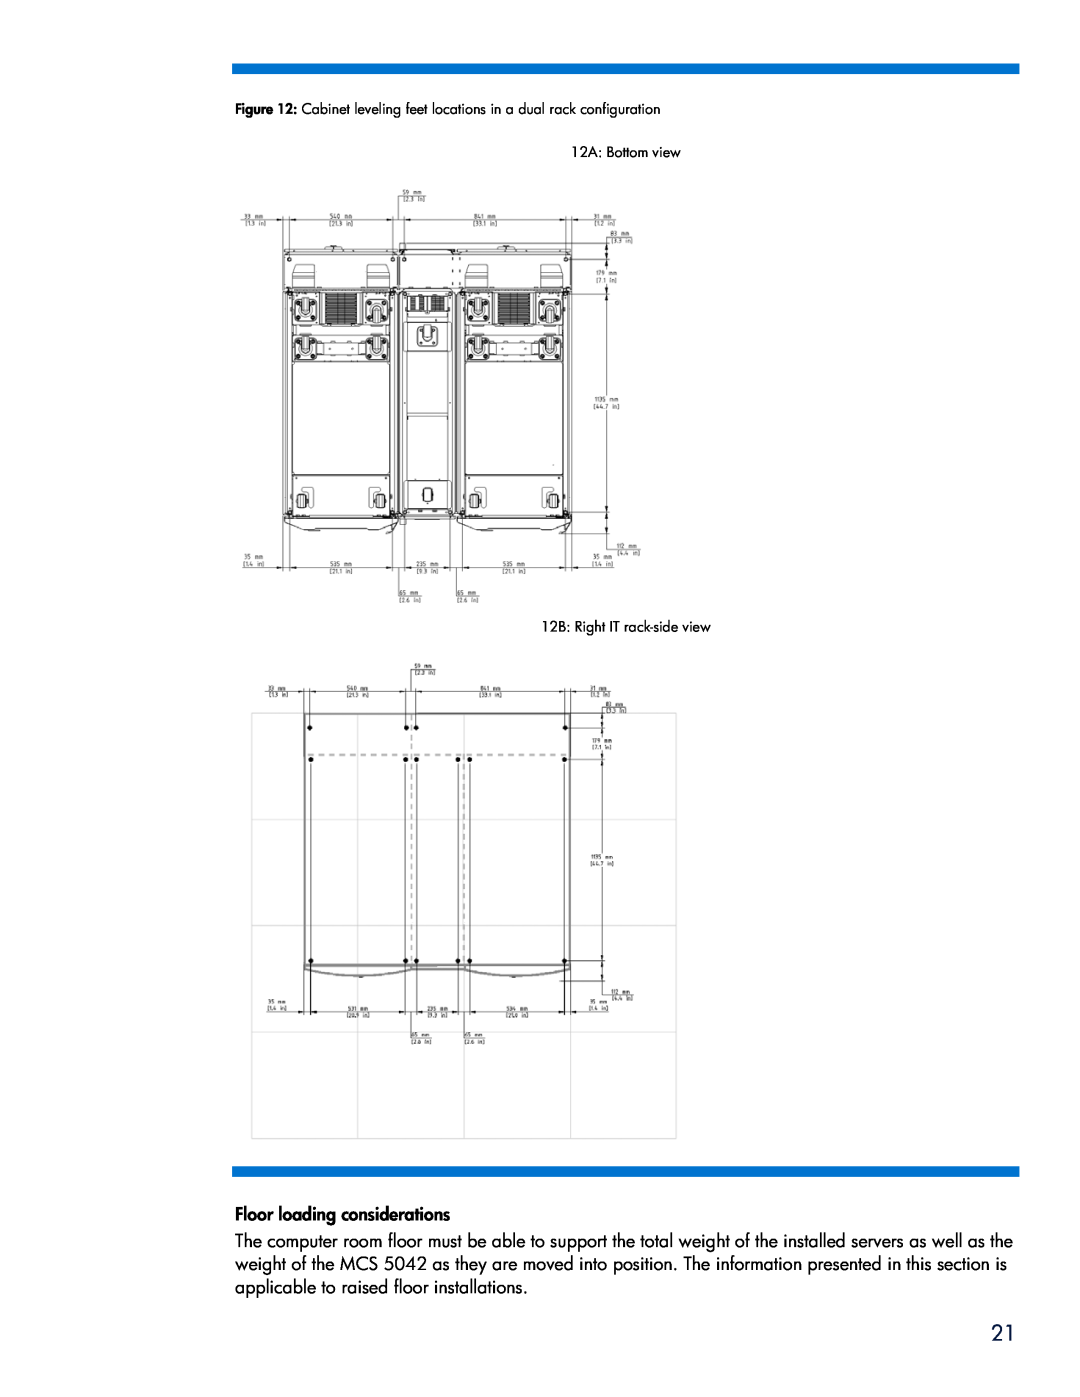 HP Modular Cooling System manual Floor loading considerations, 12B Right IT rack-side view 